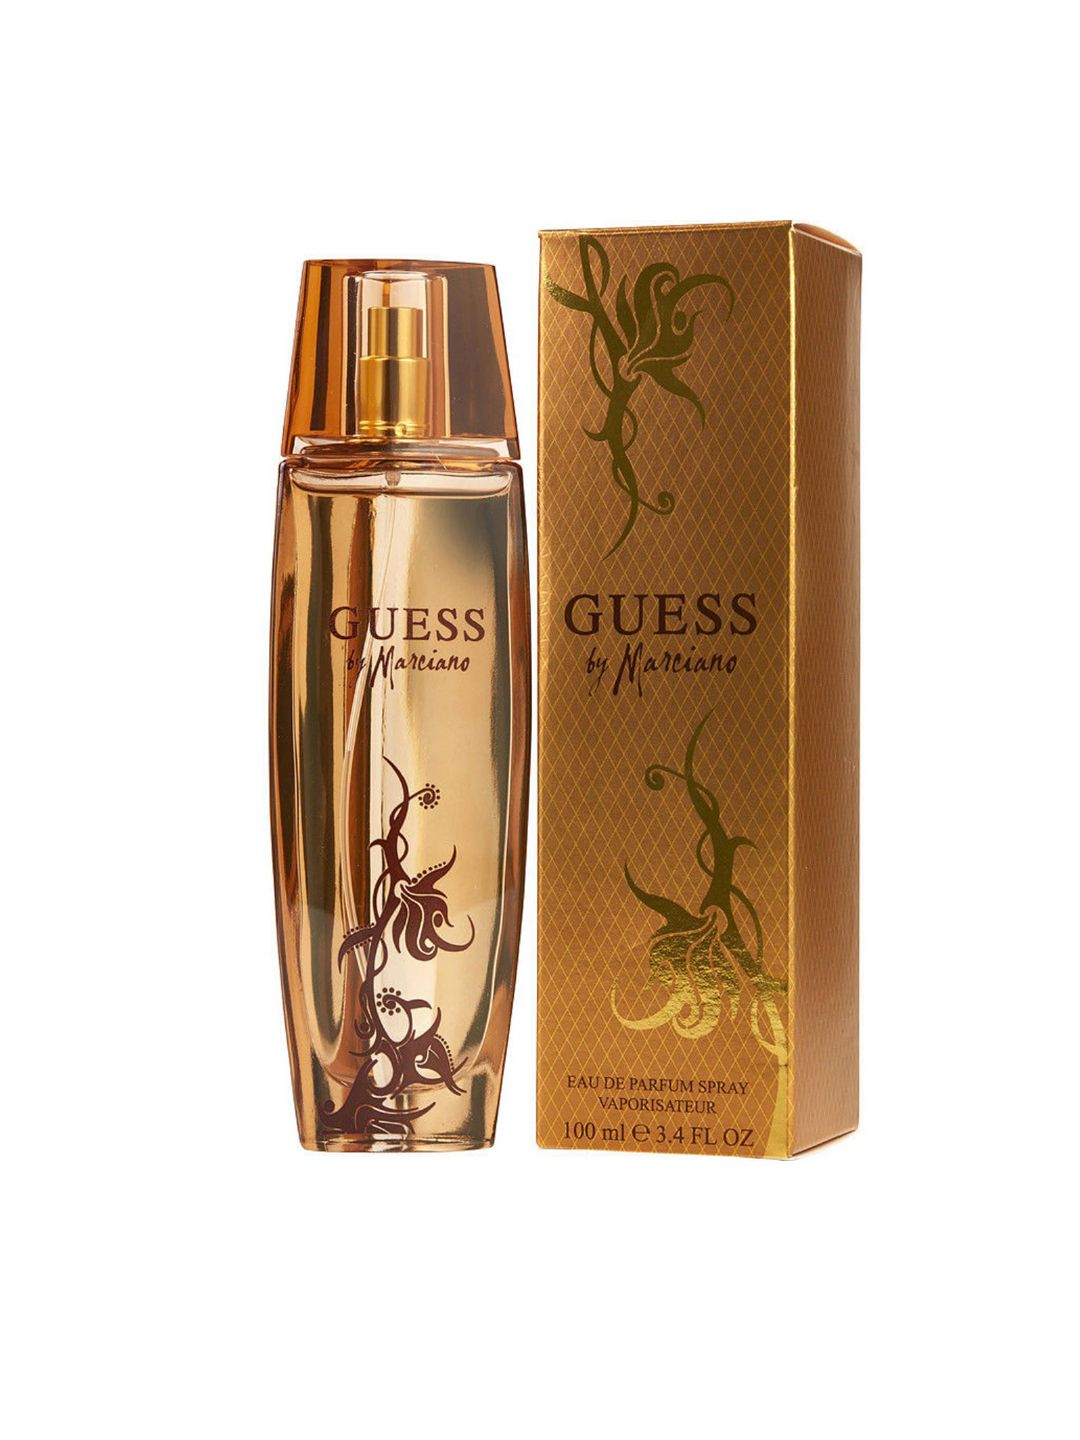 GUESS By Marciano Eau De Parfum 100 ml Price in India